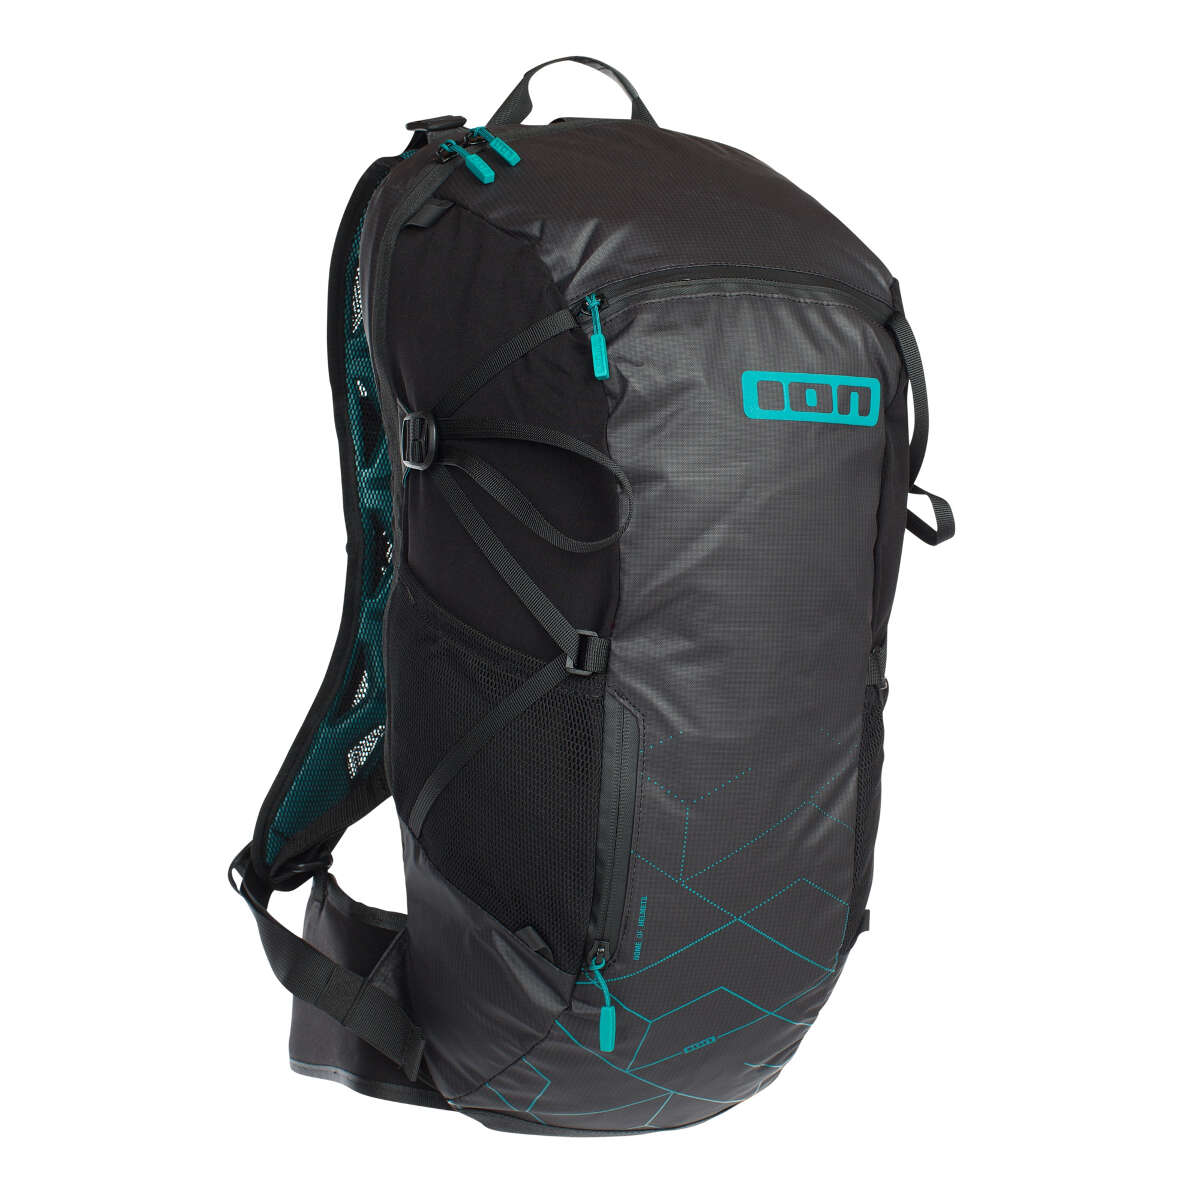 ION Backpack with Hydration System Compartment Rampart 16 Black, 16 L